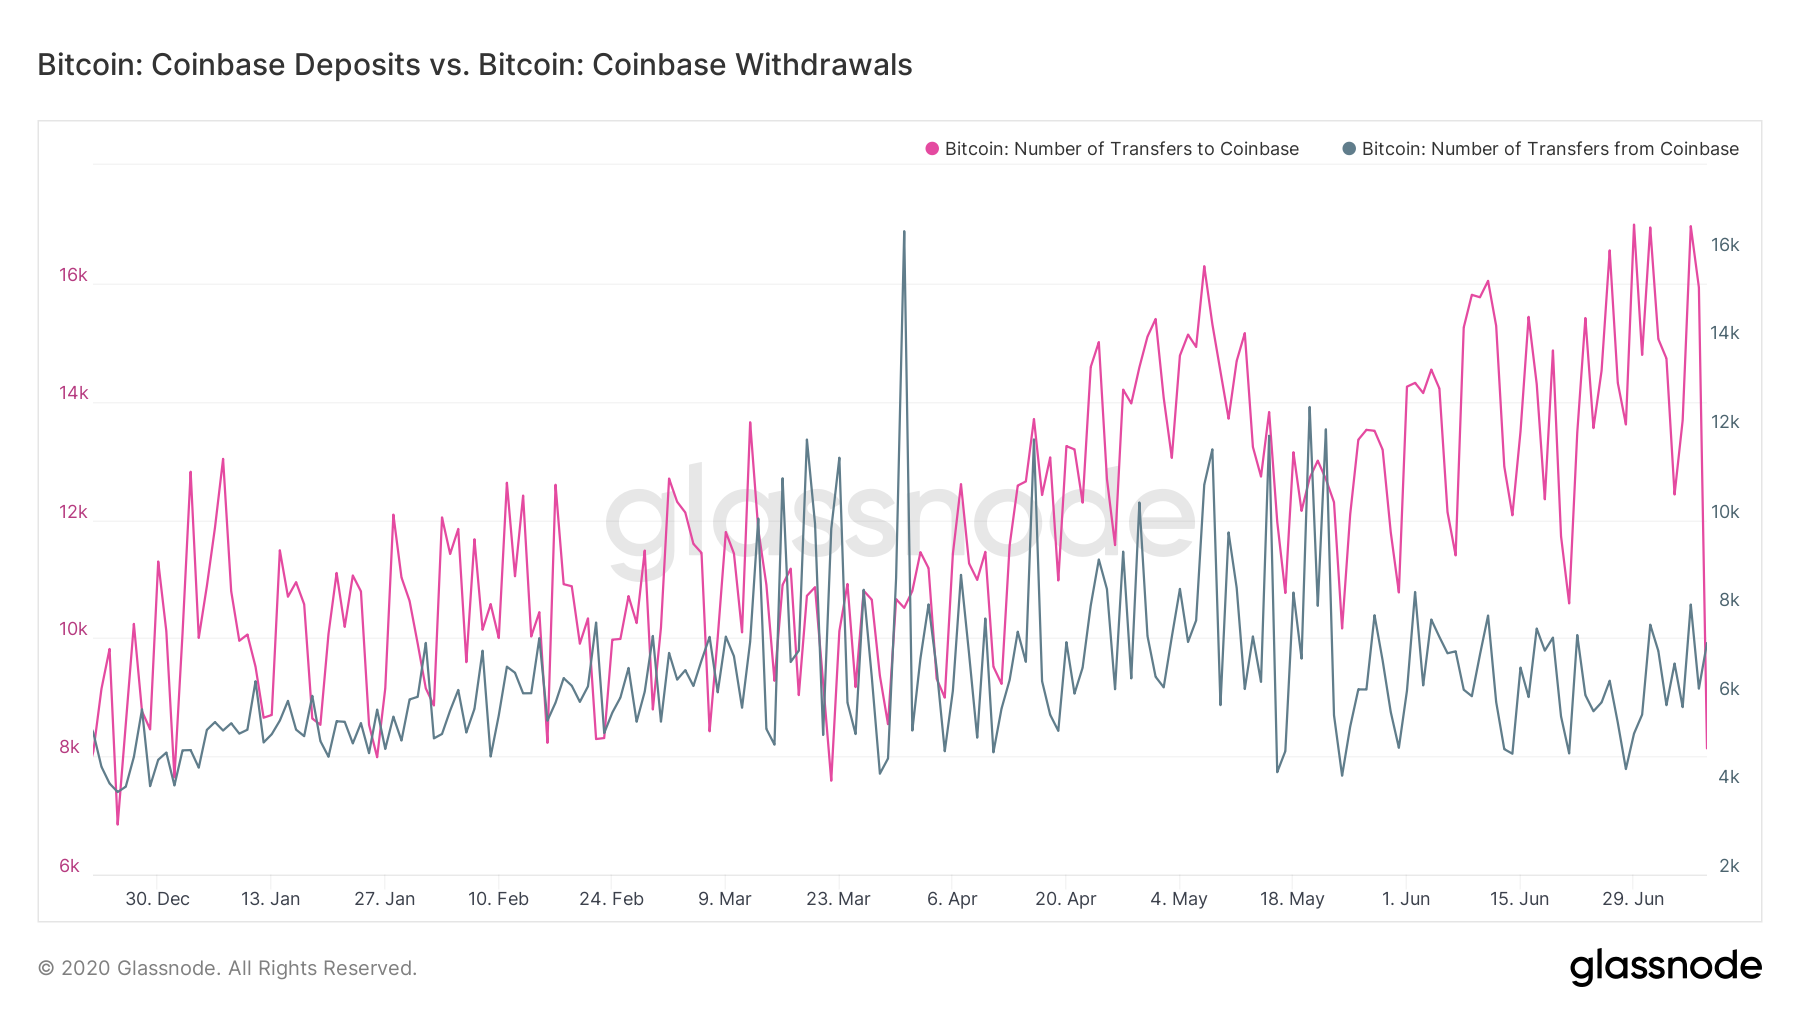 Coinbase: Number of Bitcoin deposits & withdrawals. Source: Glassnode